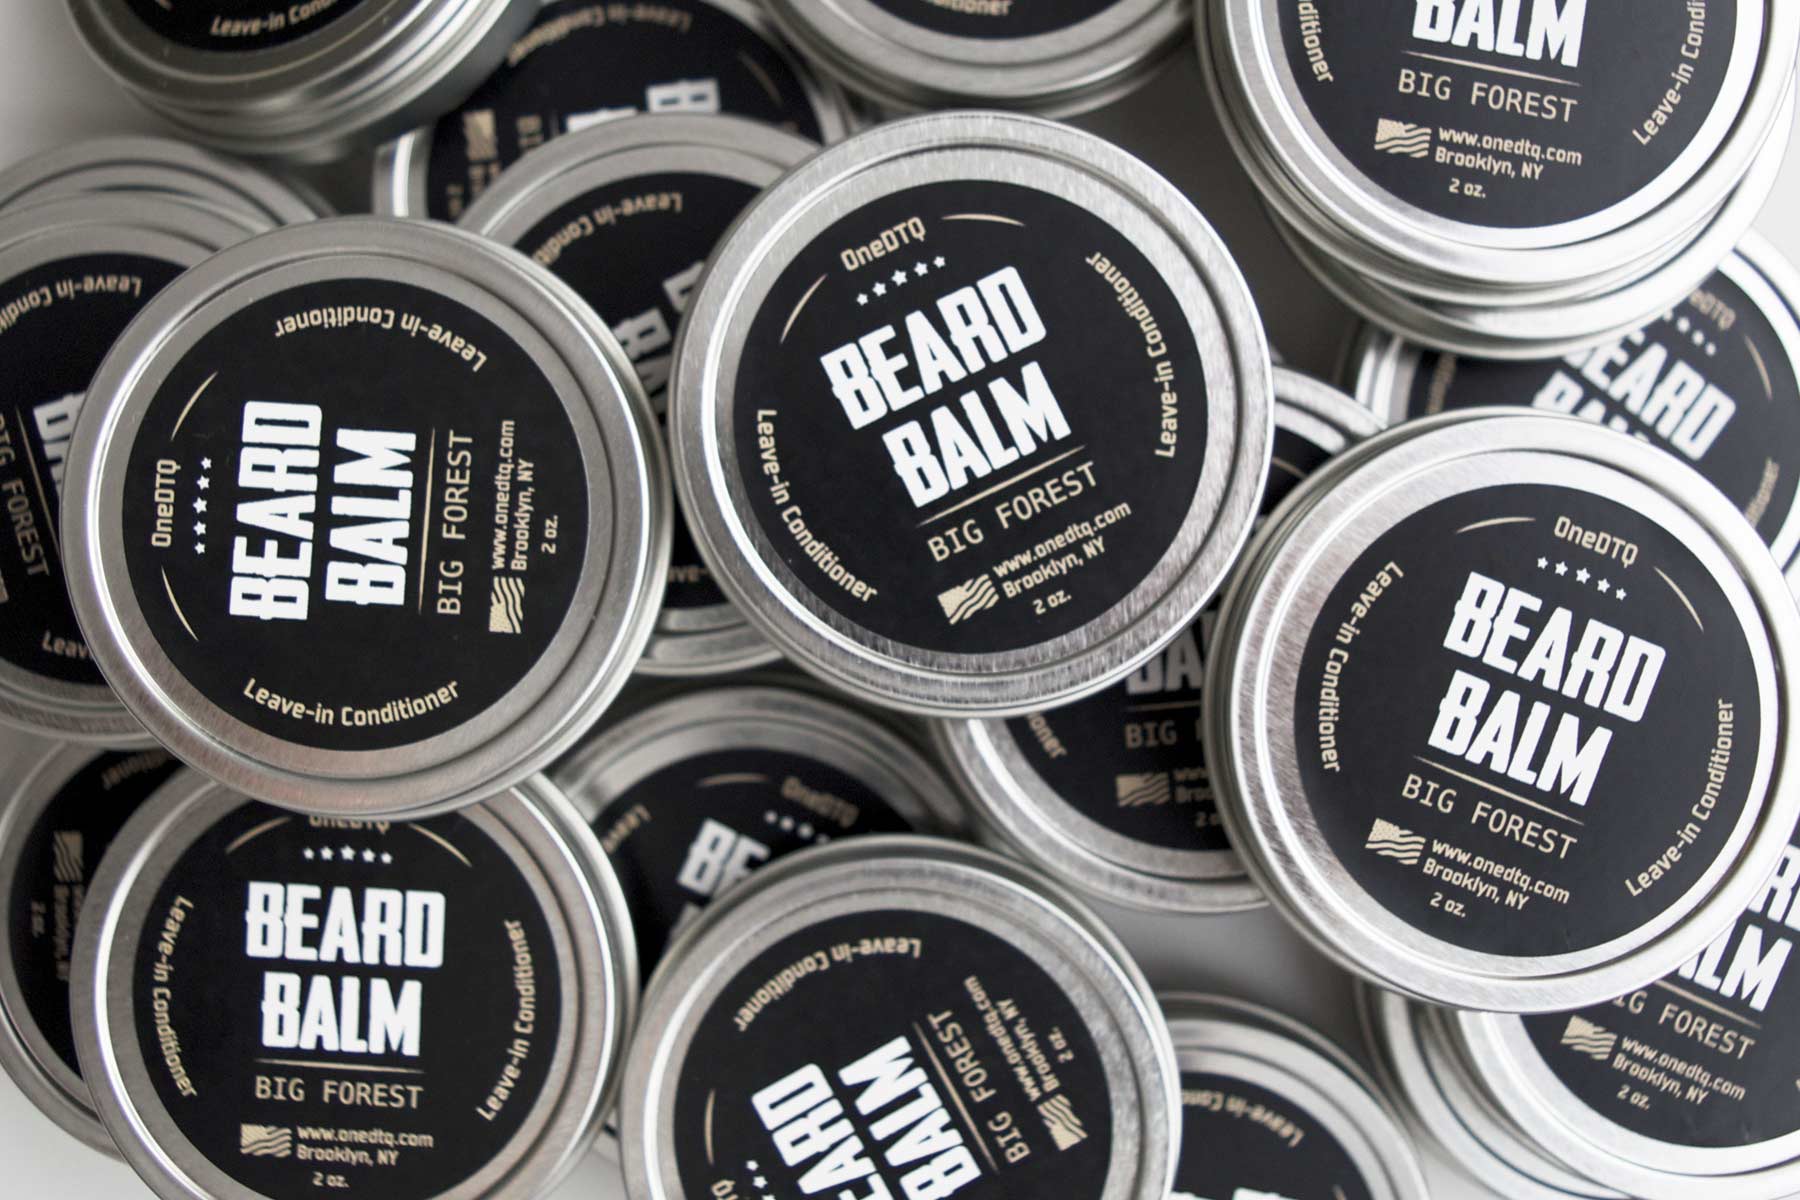 Big Forest Beard Balm - Inventory Day